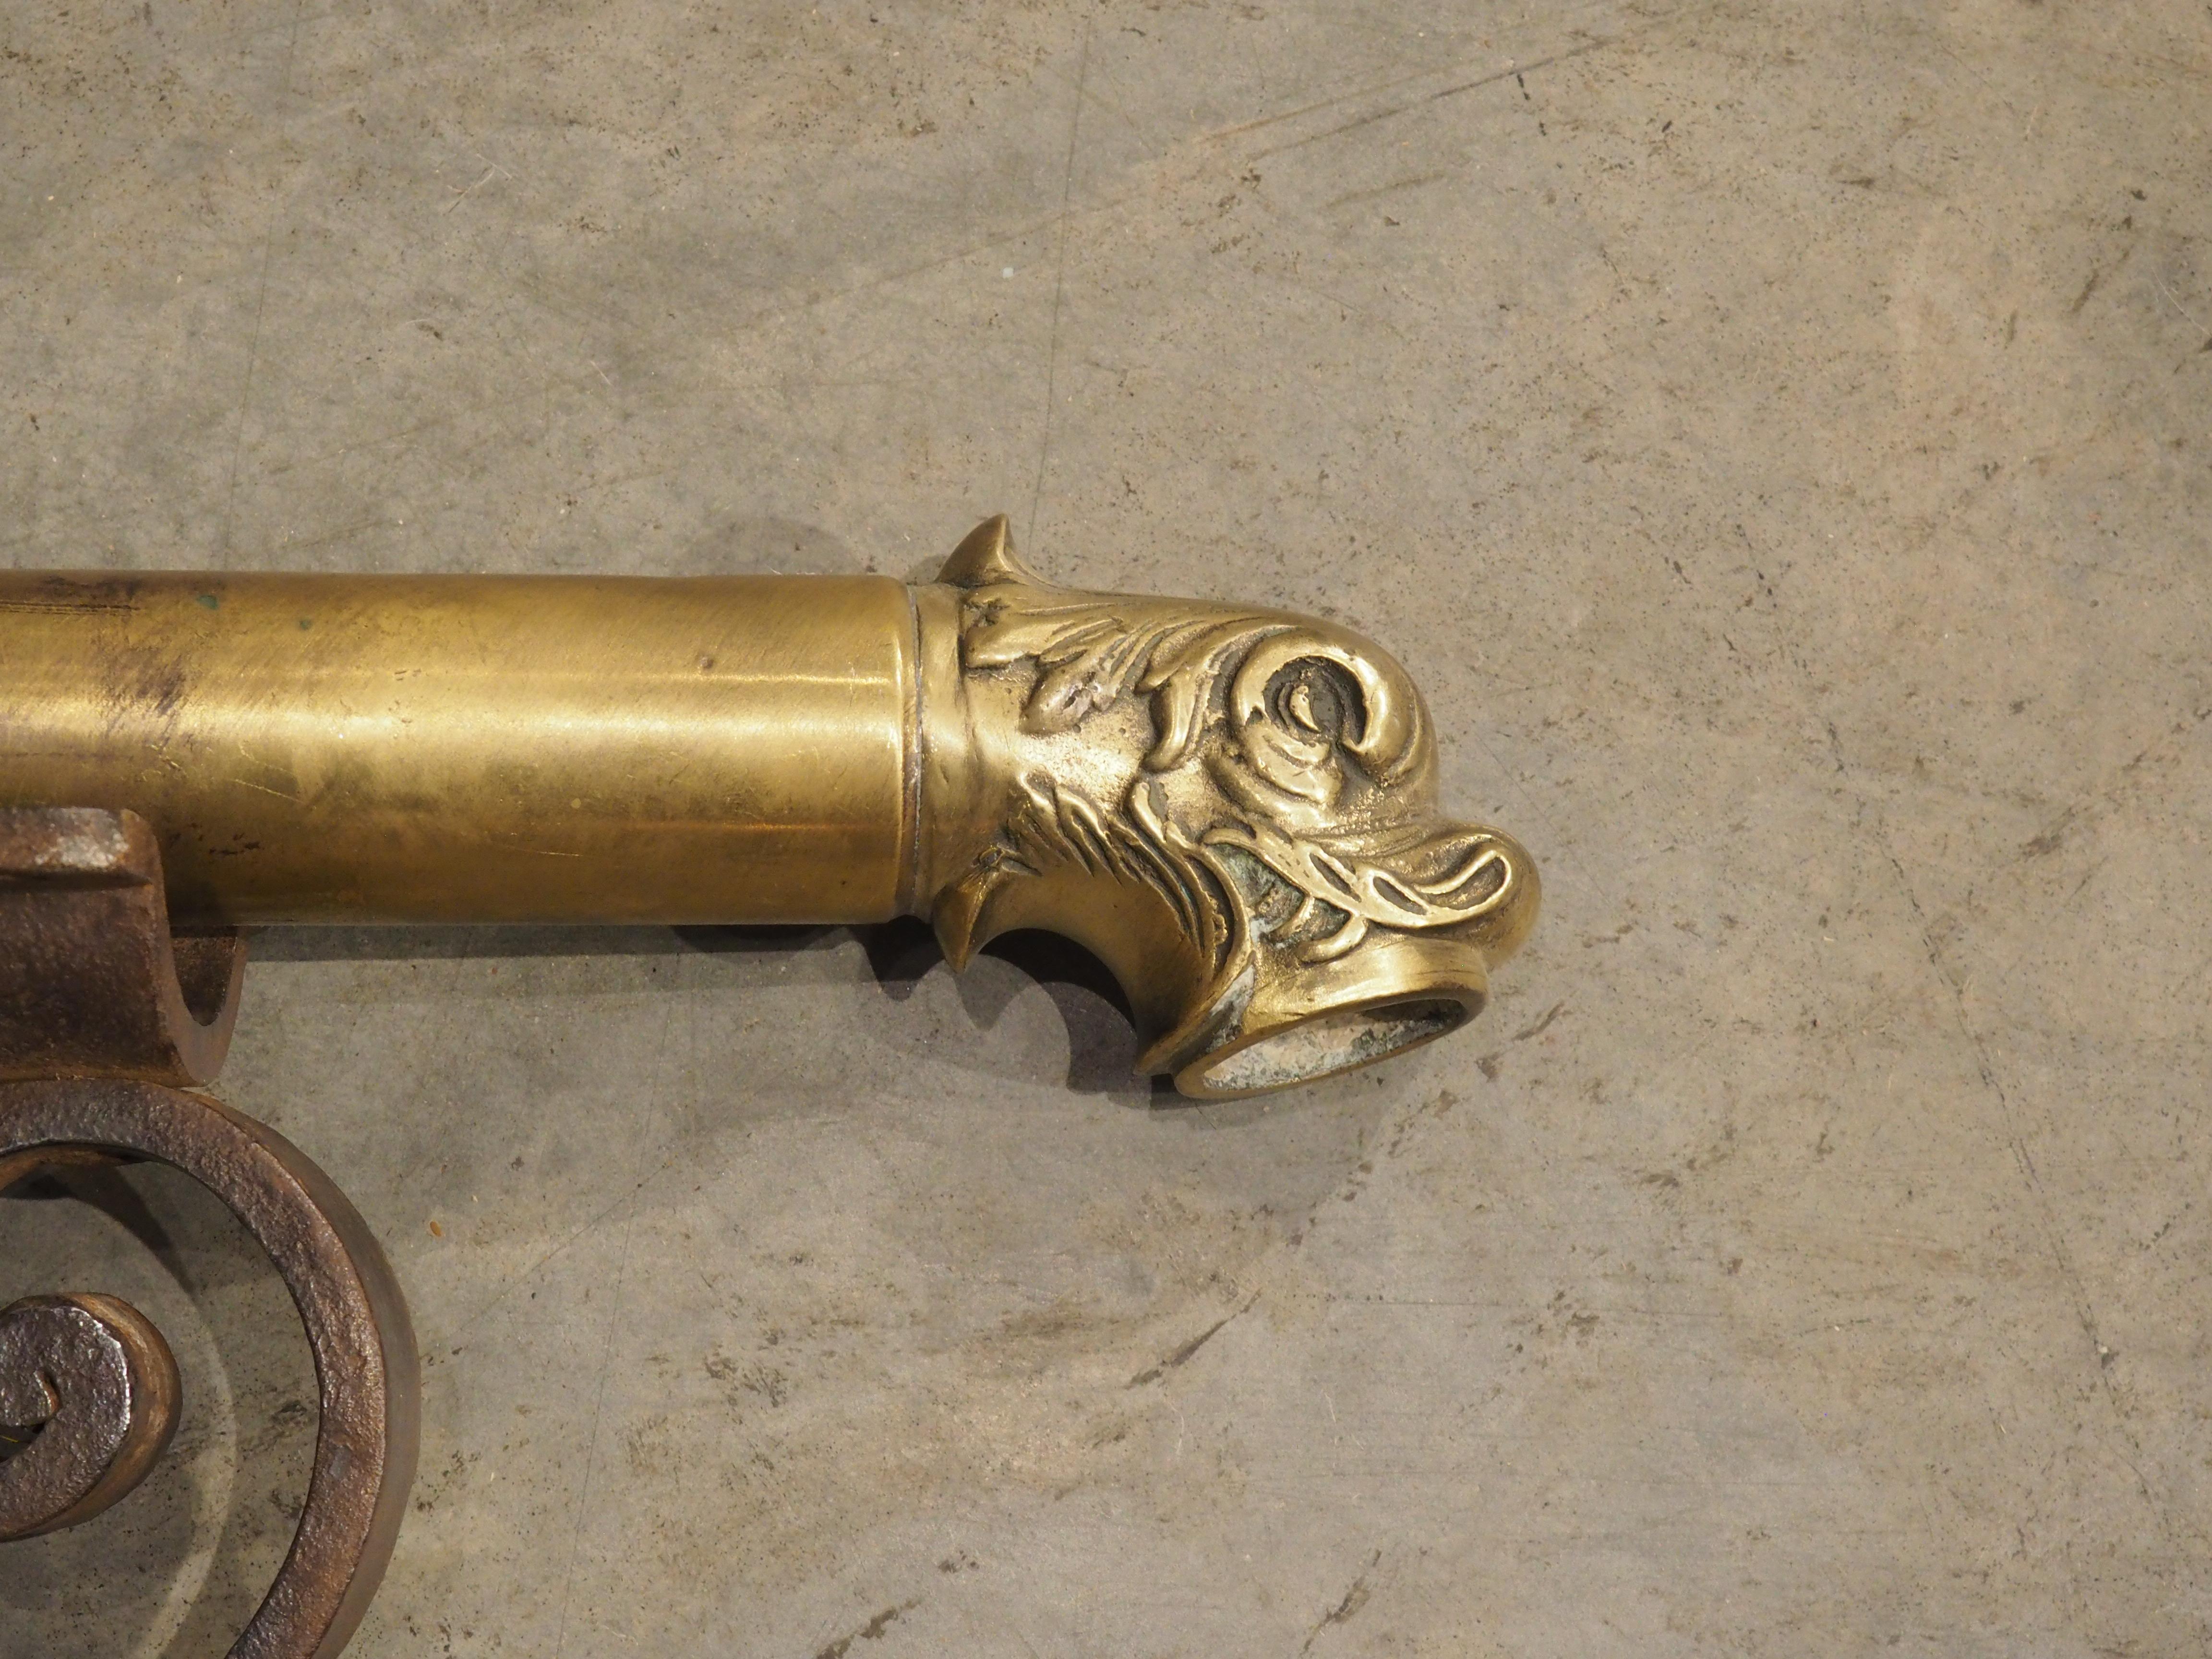 When France was ruled by kings, the heir to the throne was known as the Dauphin, therefore we see the dolphin motif used throughout many periods of French history and decorative arts. This brass fountain spout was crafted circa 1880 in eastern